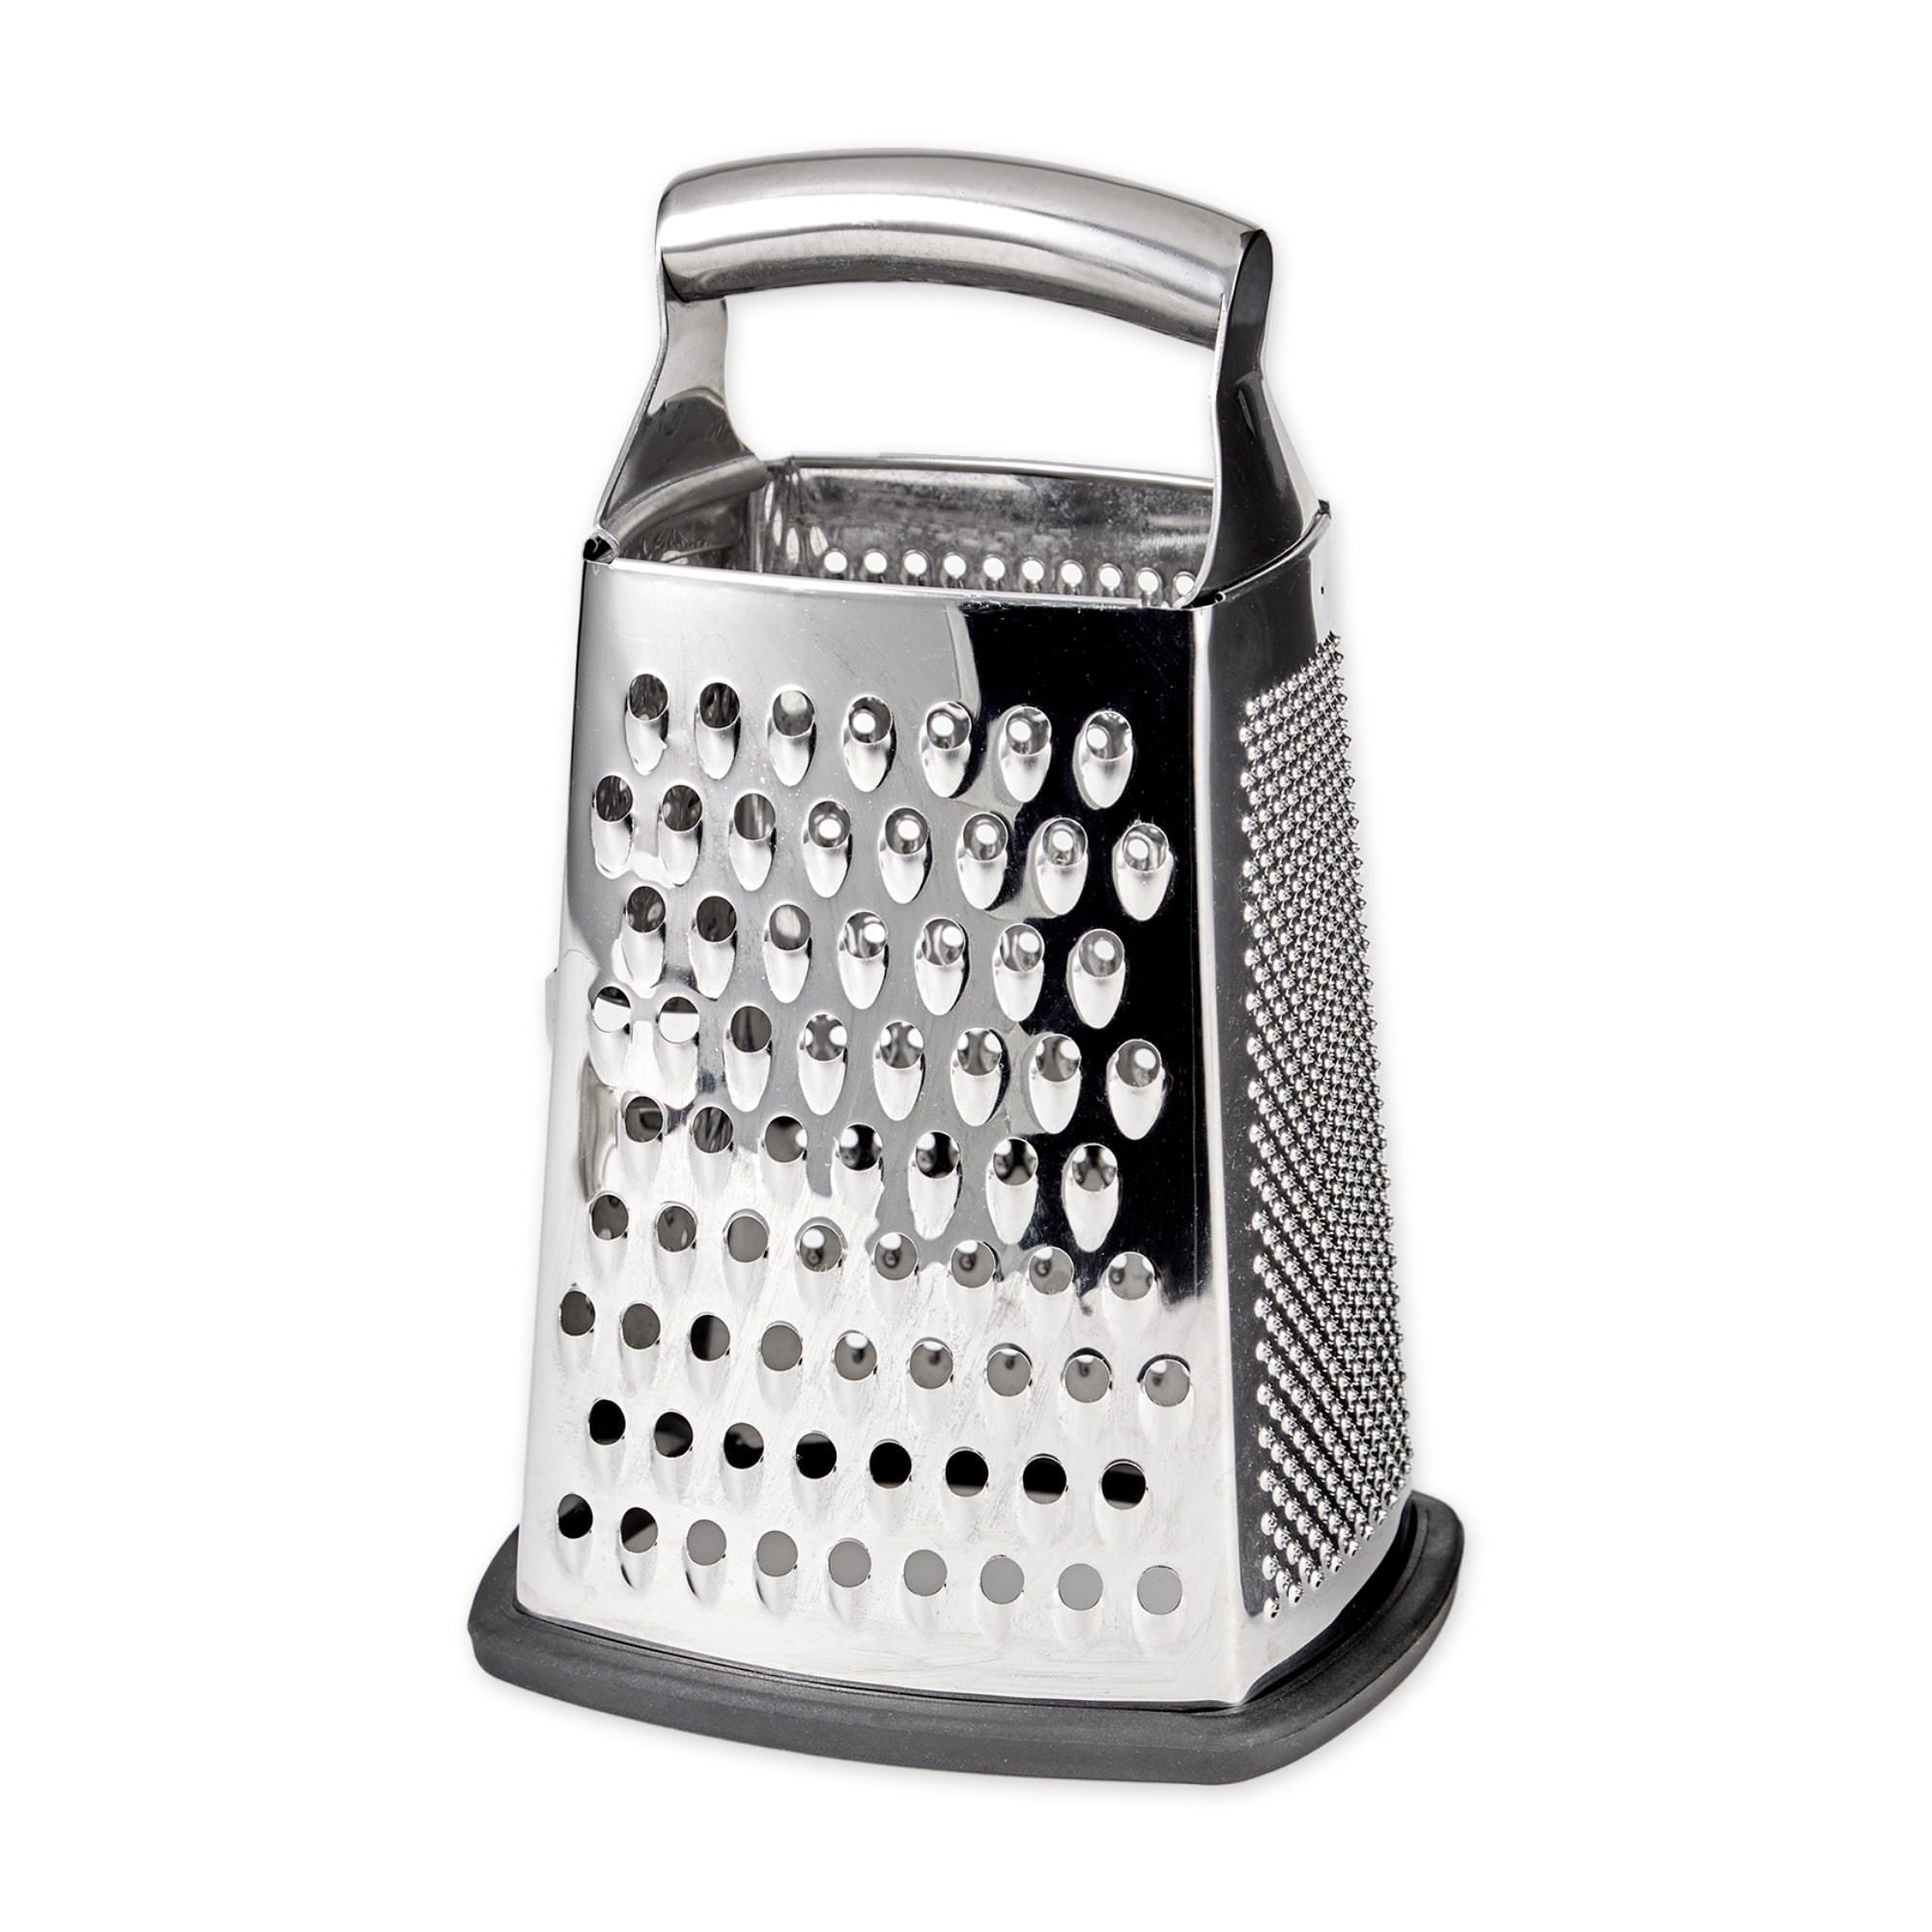 https://ak1.ostkcdn.com/images/products/is/images/direct/23ed2b2786a1c5cc99fa1630de2b778a2a0215a0/Deluxe-Handheld-Box-Grater.jpg